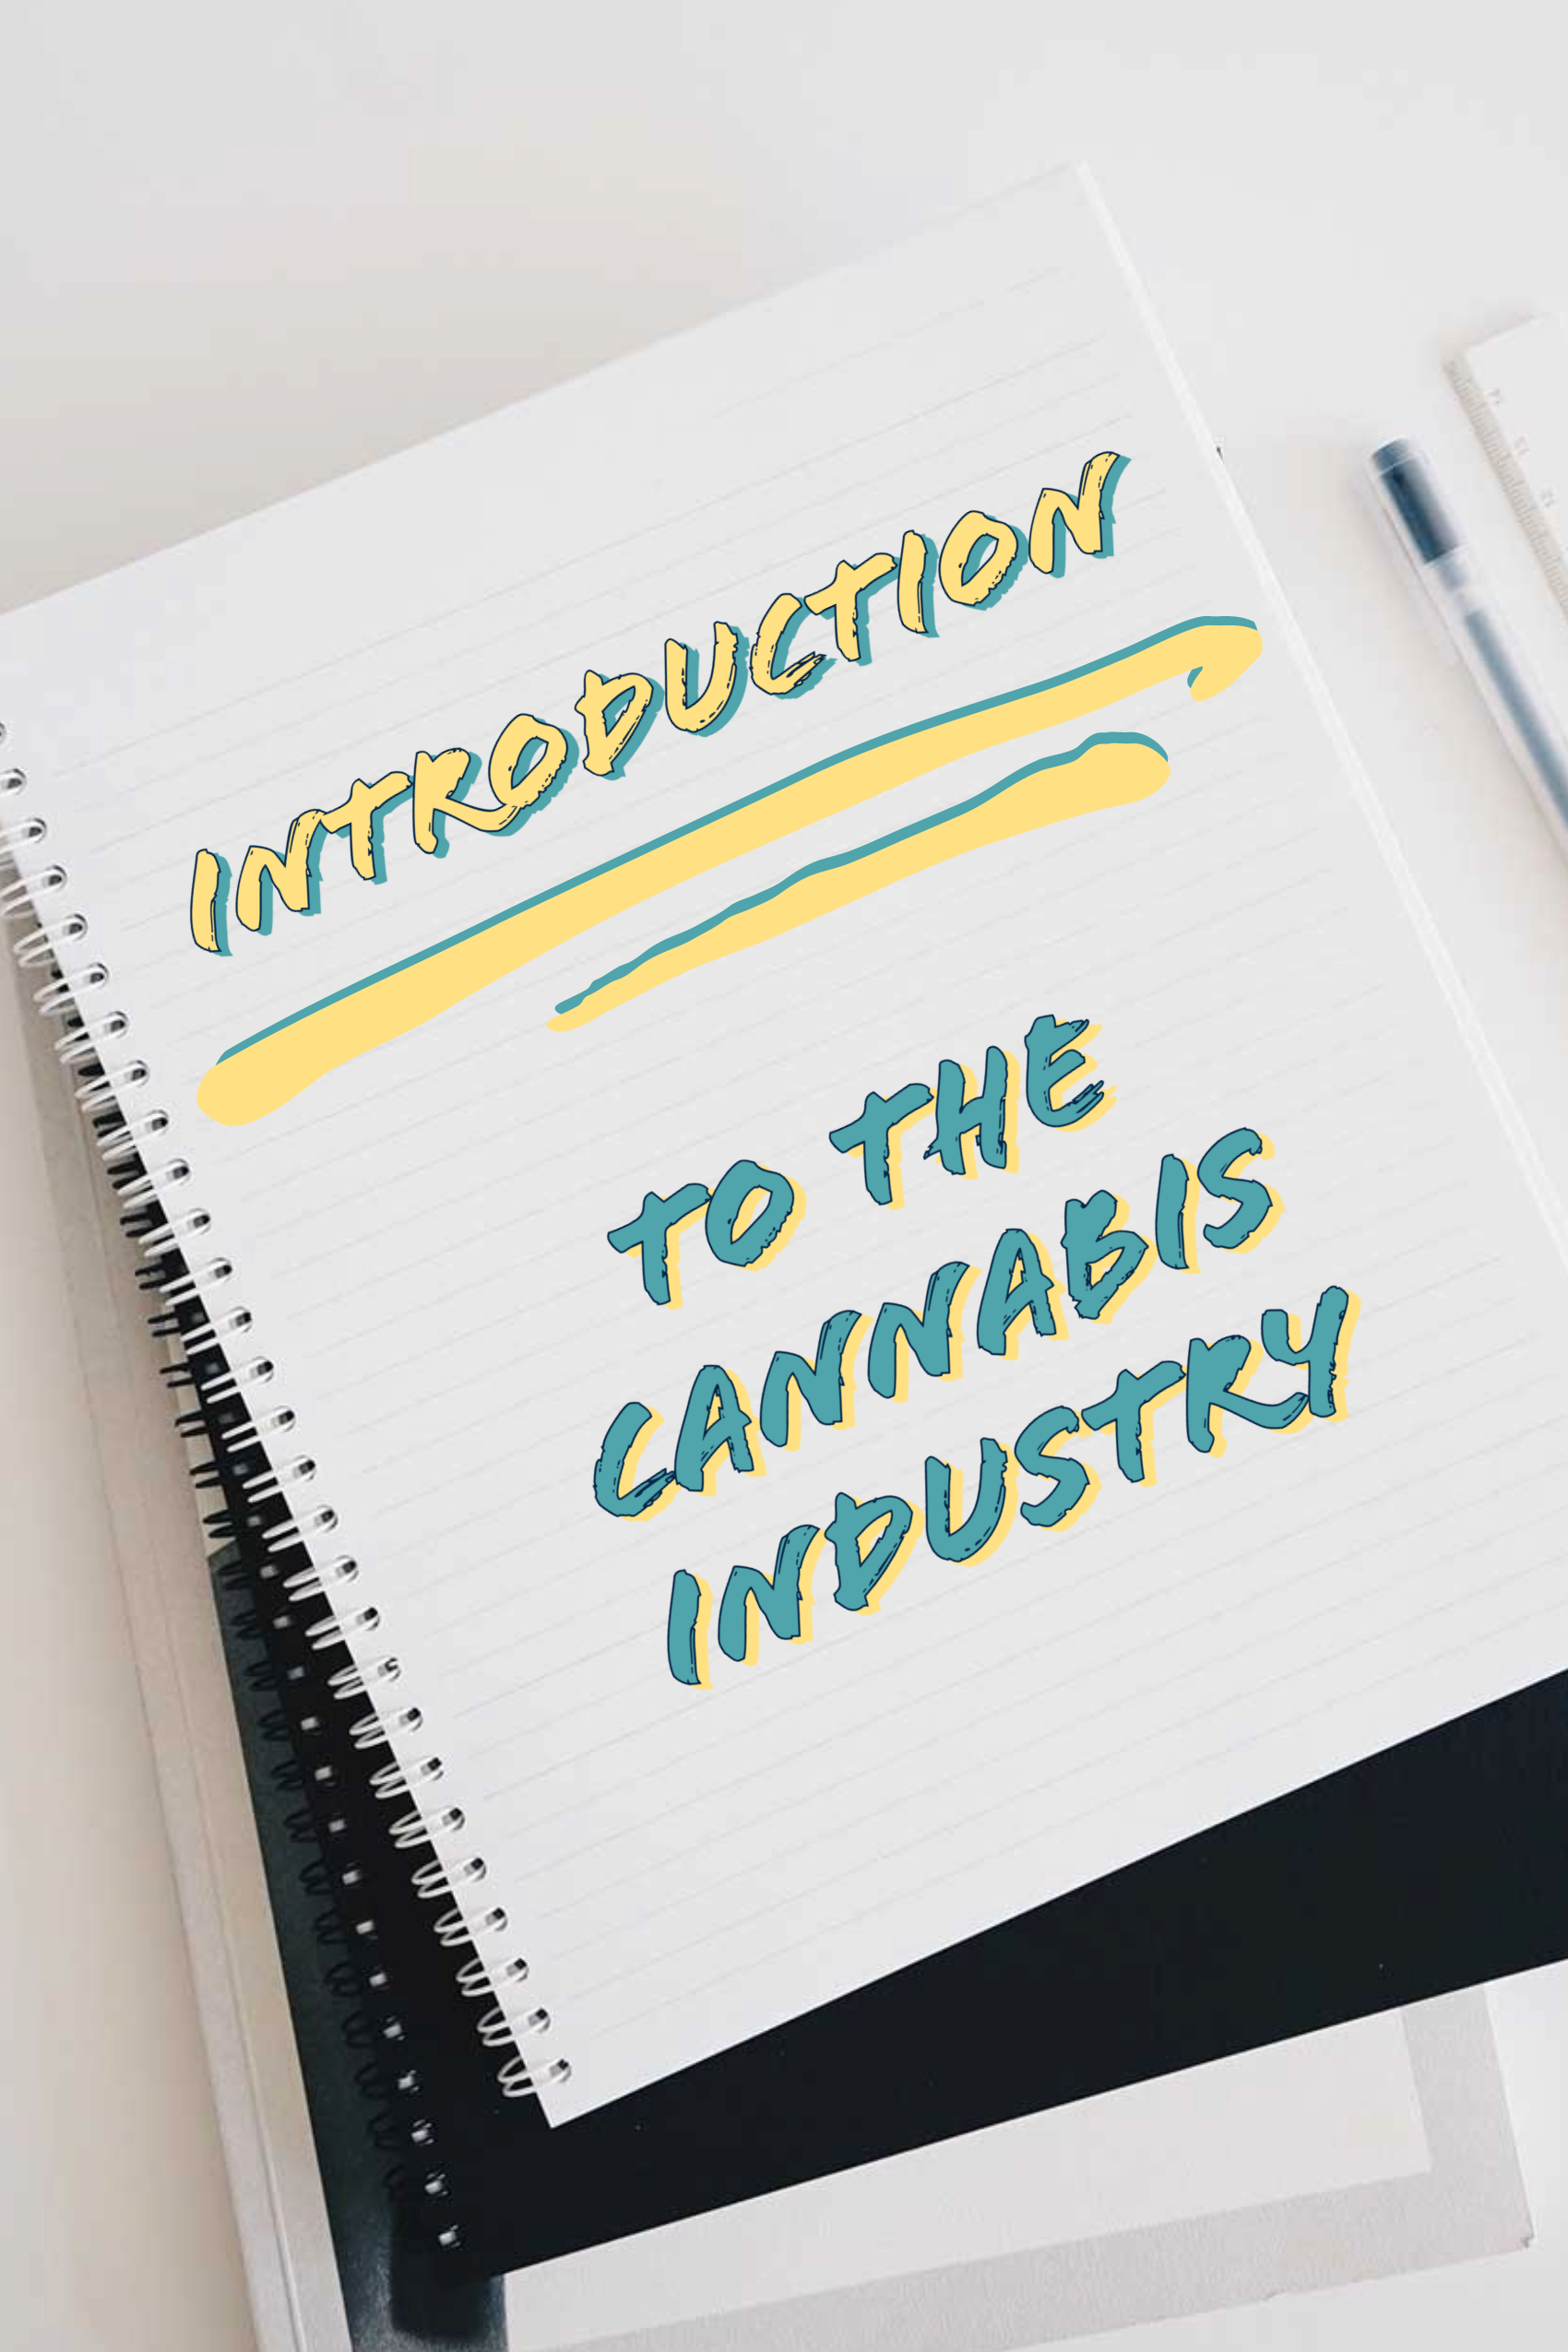 Introduction to the Cannabis Industry